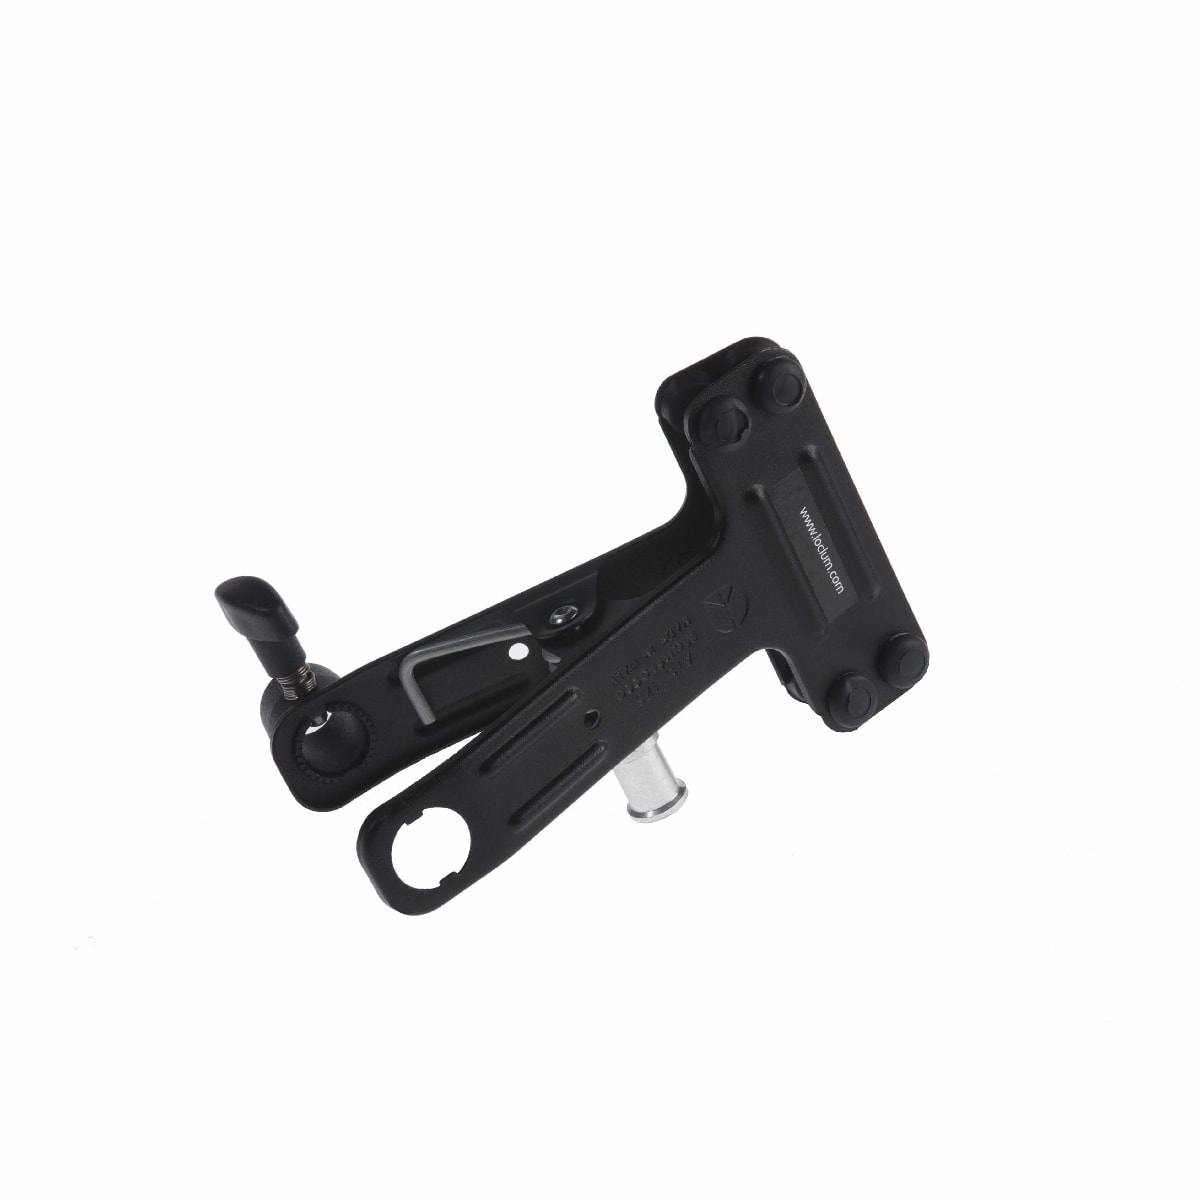 Manfrotto Spring Clamp (175)